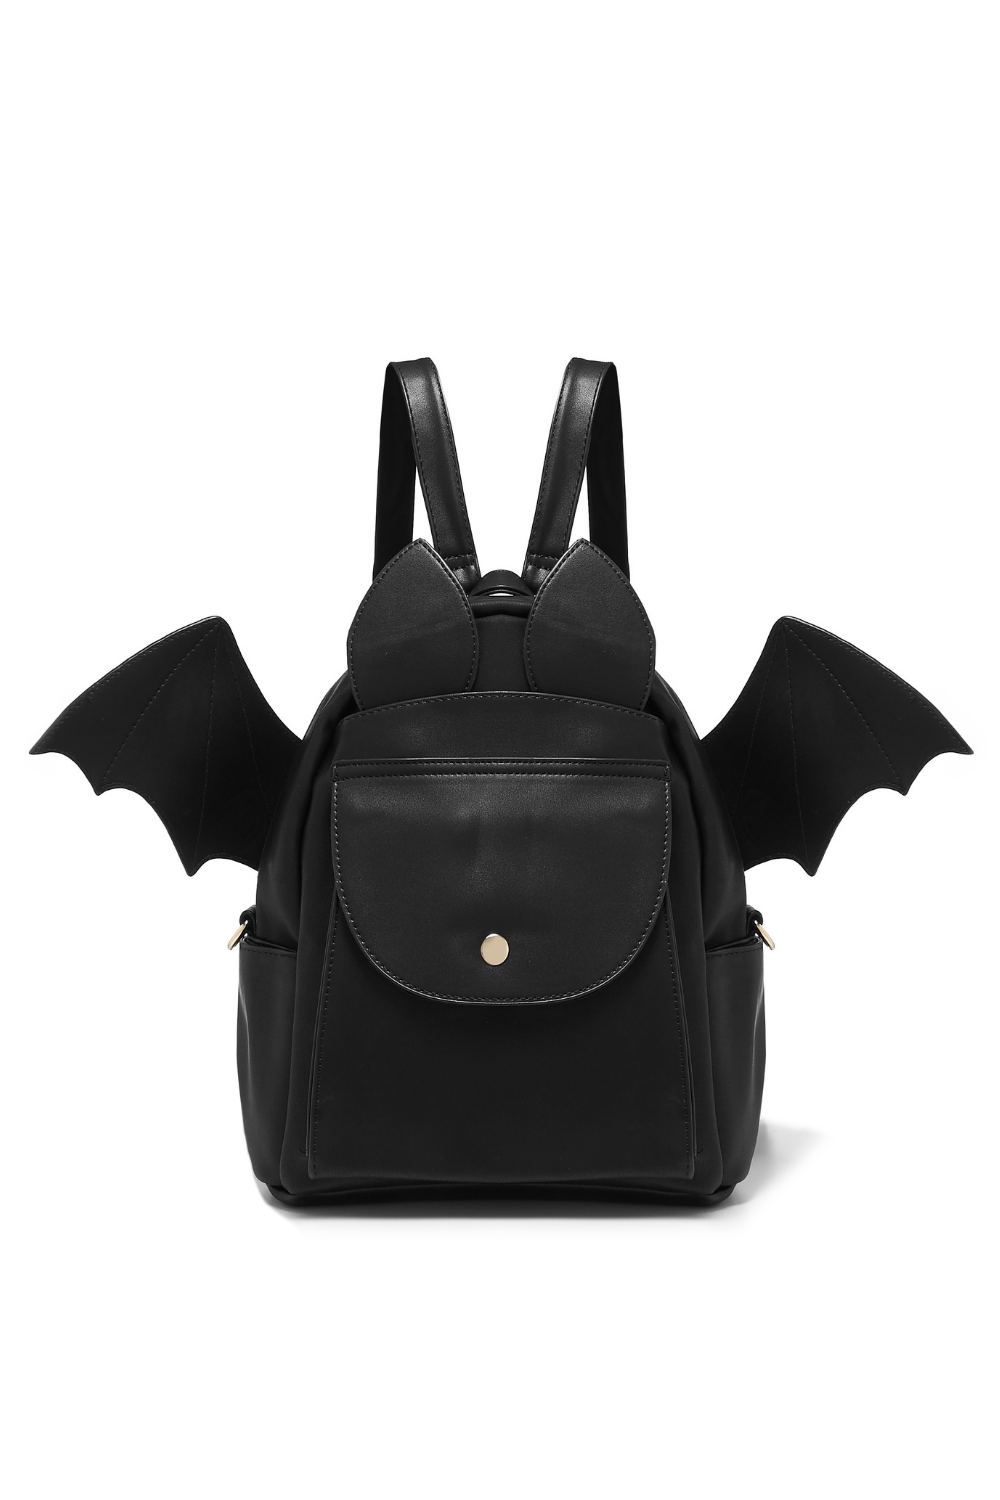 Black backpack with bat wings 